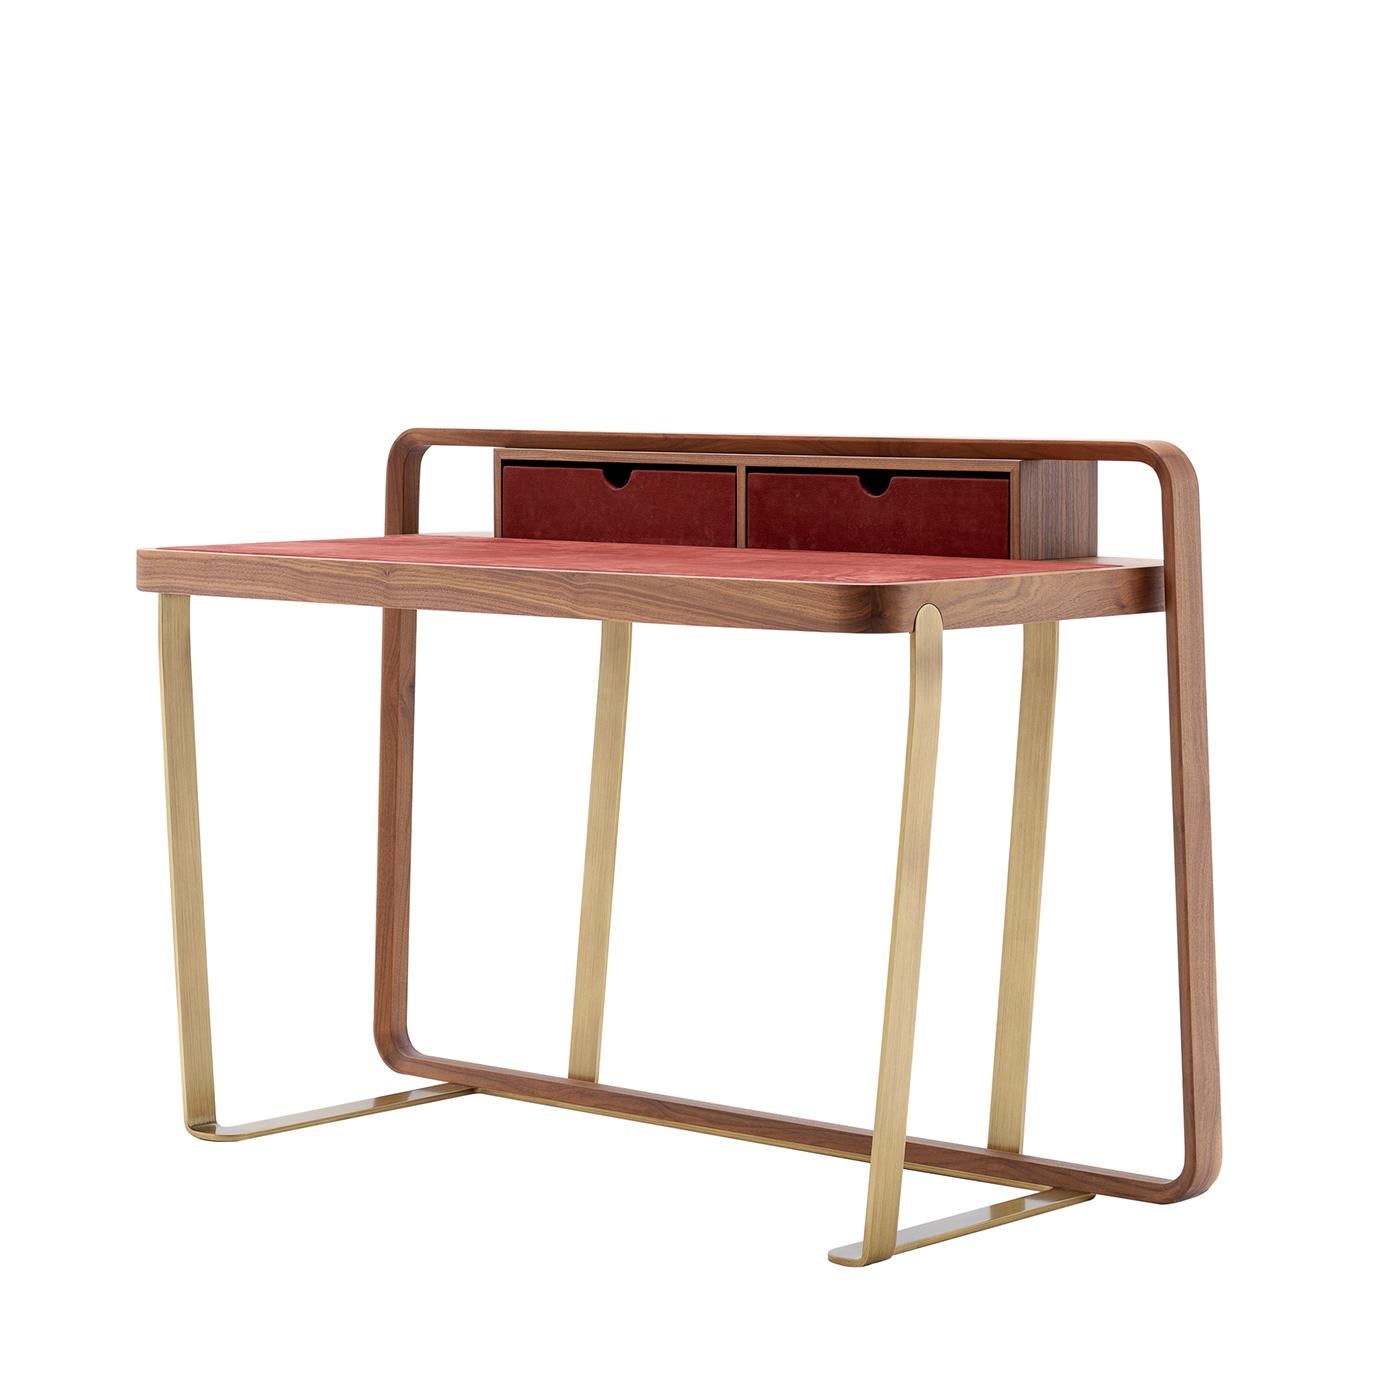 Showcasing a light and airy structure, this desk is a one of a kind design by Andrea Pinori and Giorgio Balestri. The structure features an open base that combines an American walnut frame and metal legs boasting a satin brass finish. The top,